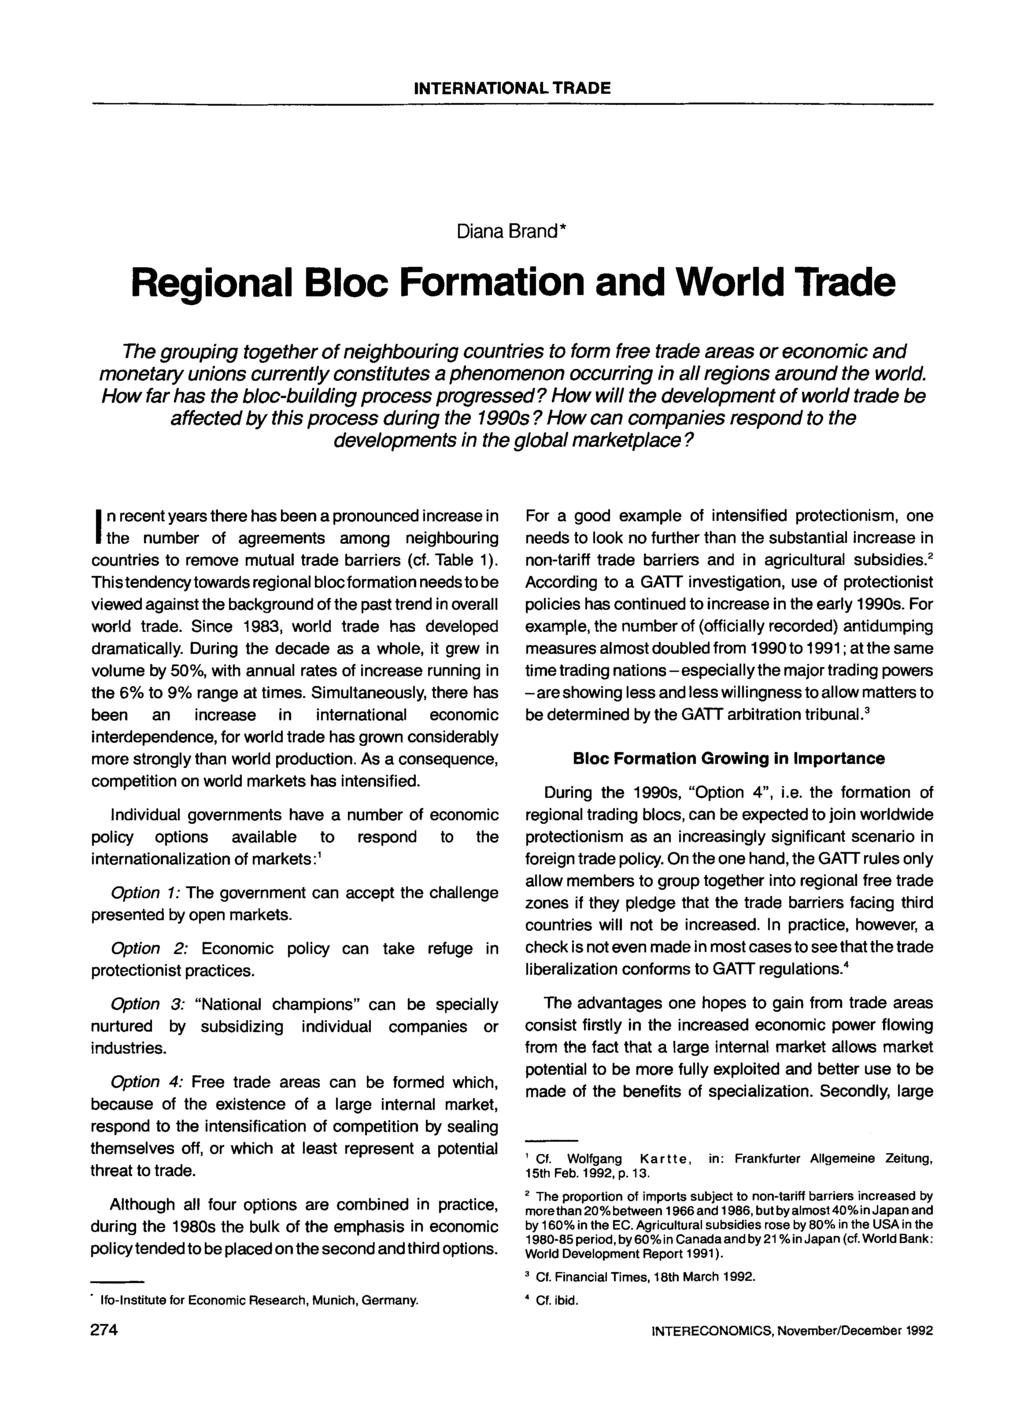 INTERNATIONAL TRADE Diana Brand* Regional Bloc Formation and World Trade The grouping together of neighbouring countries to form free trade areas or economic and monetary unions currently constitutes